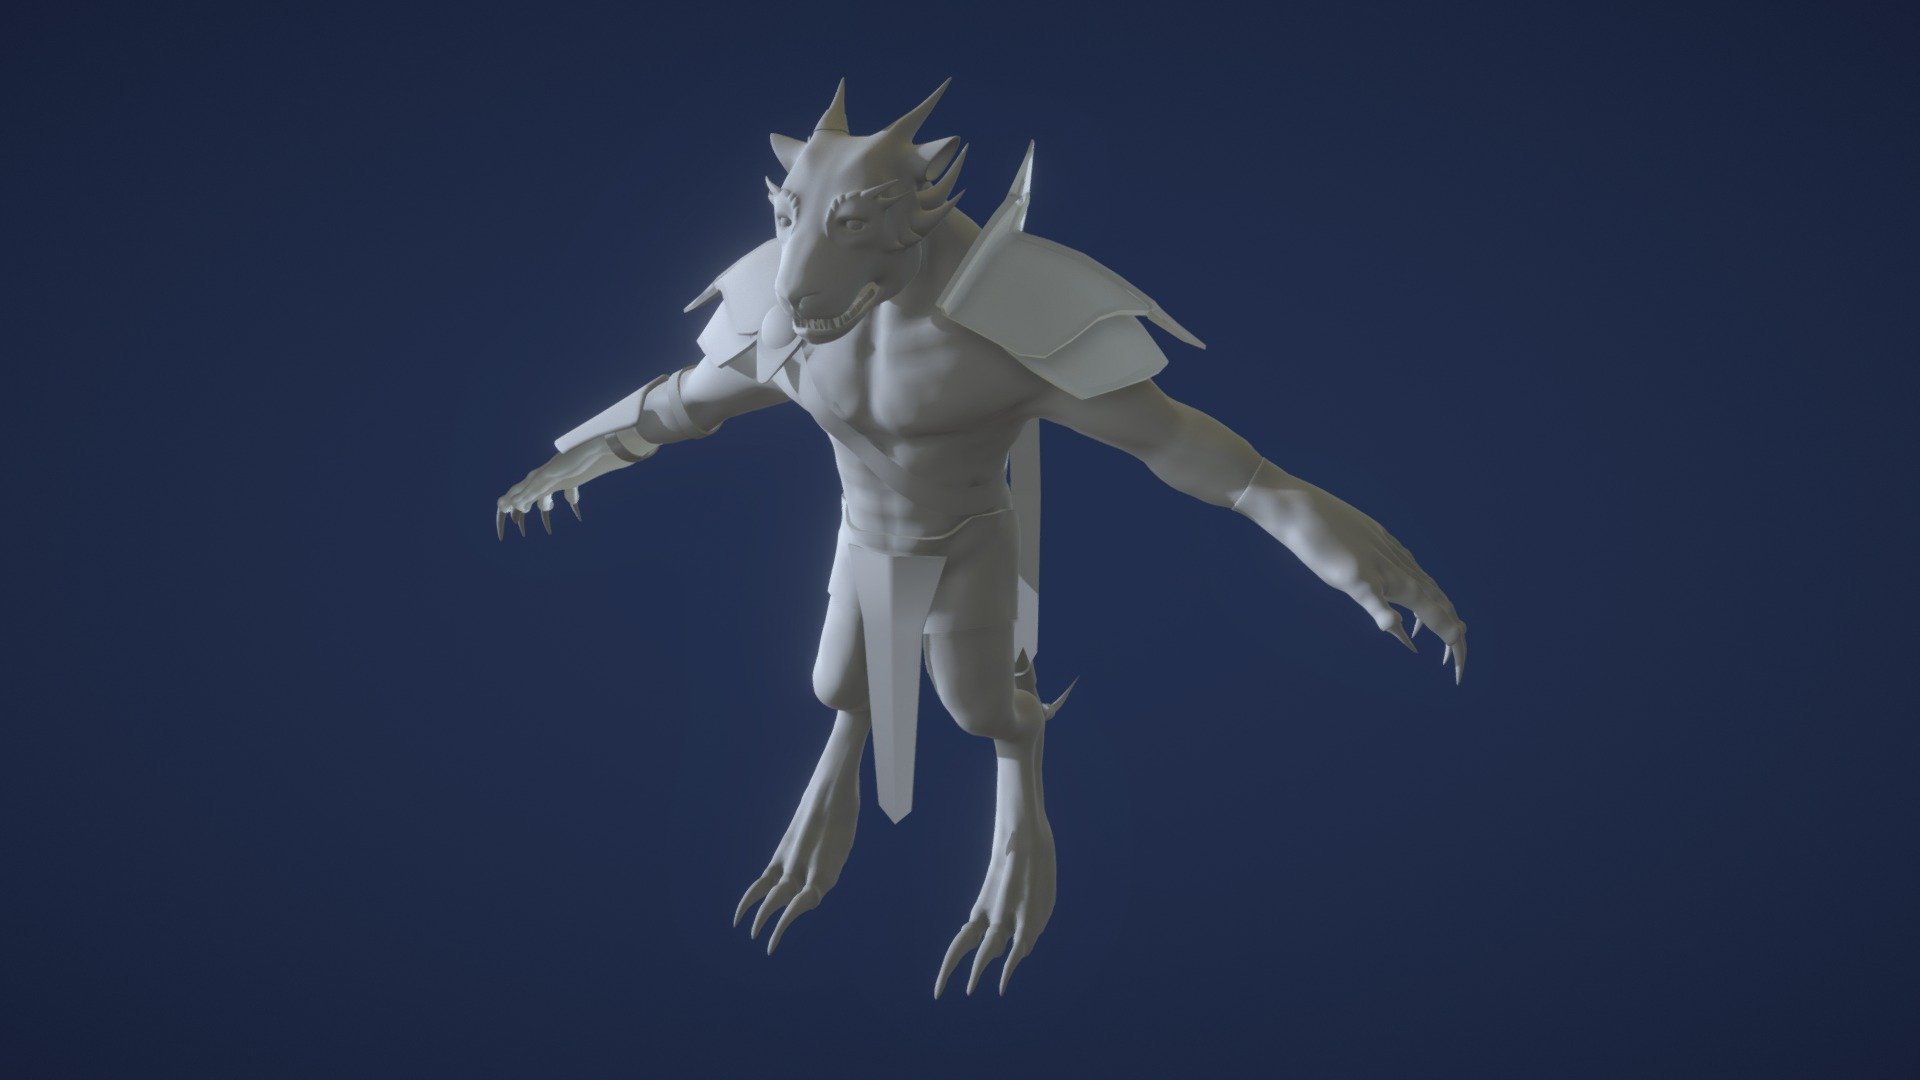 Another very old model I created back in 2013 at Bournemouth University for our hybrid creature assignment. This model is meant to decpict a mix between a bearded dragon, a lion, and a human 3d model